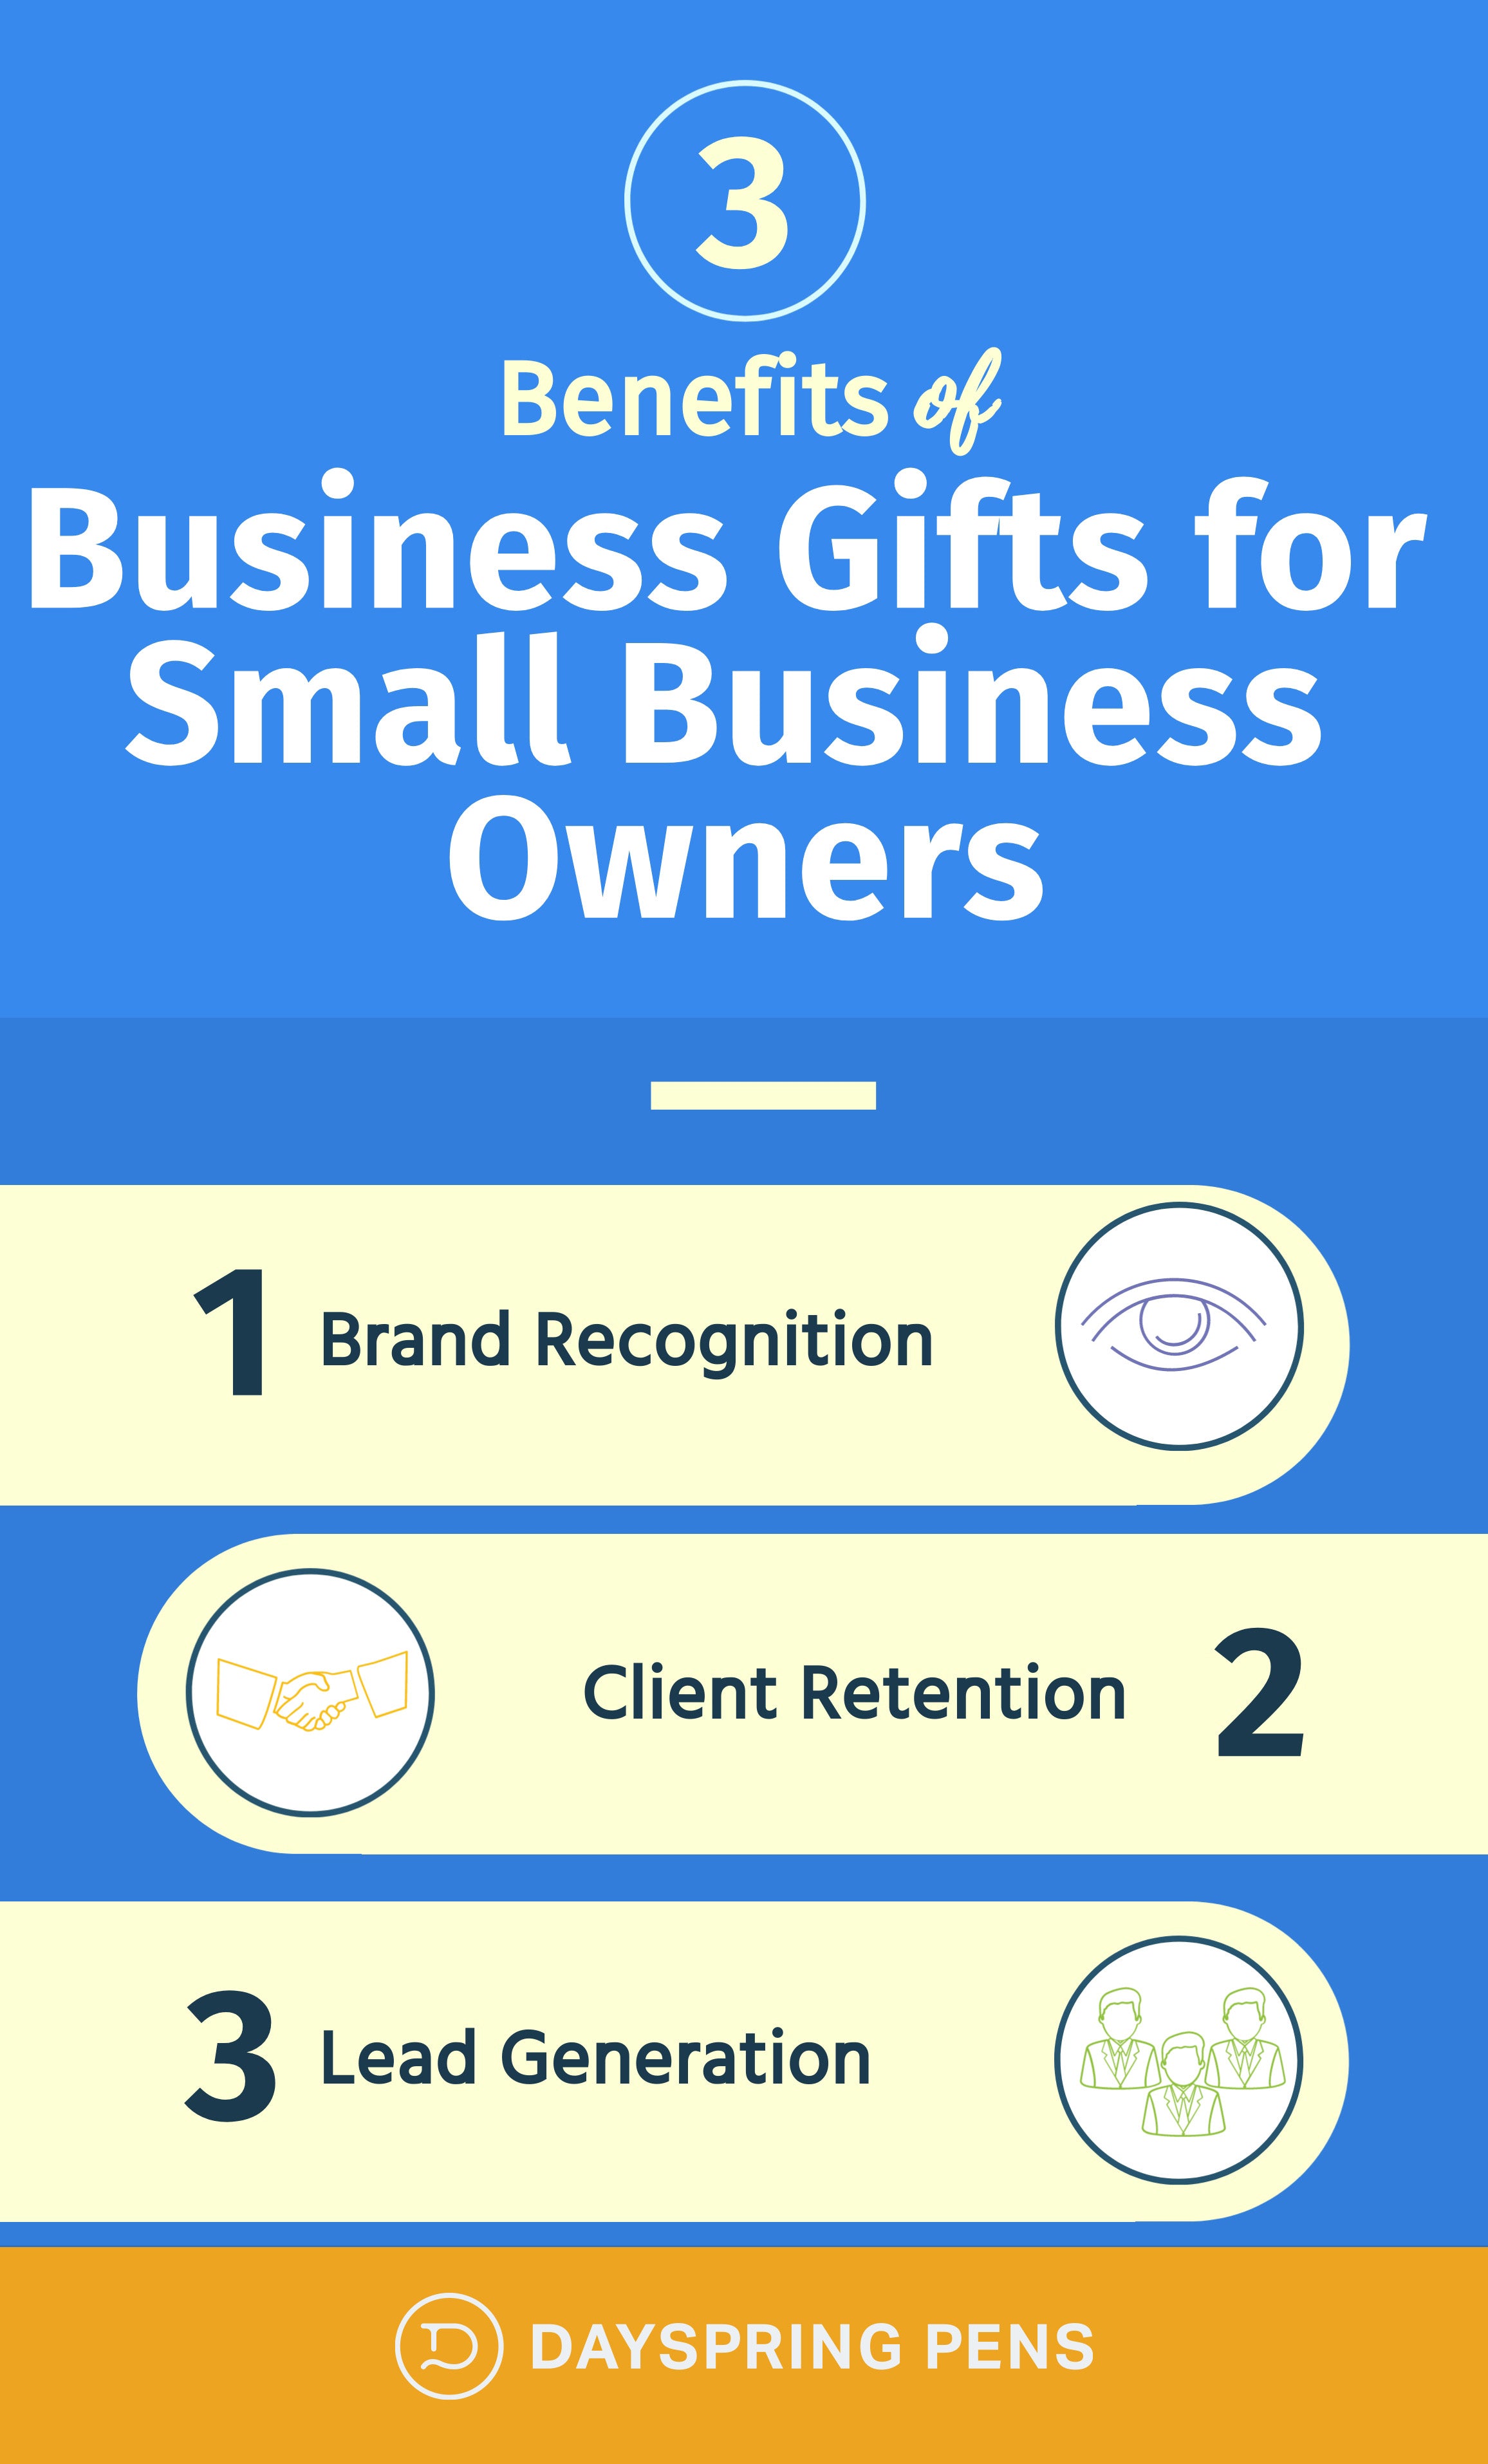 3 Benefits of Business Gifts for Small Business Owners Infographic